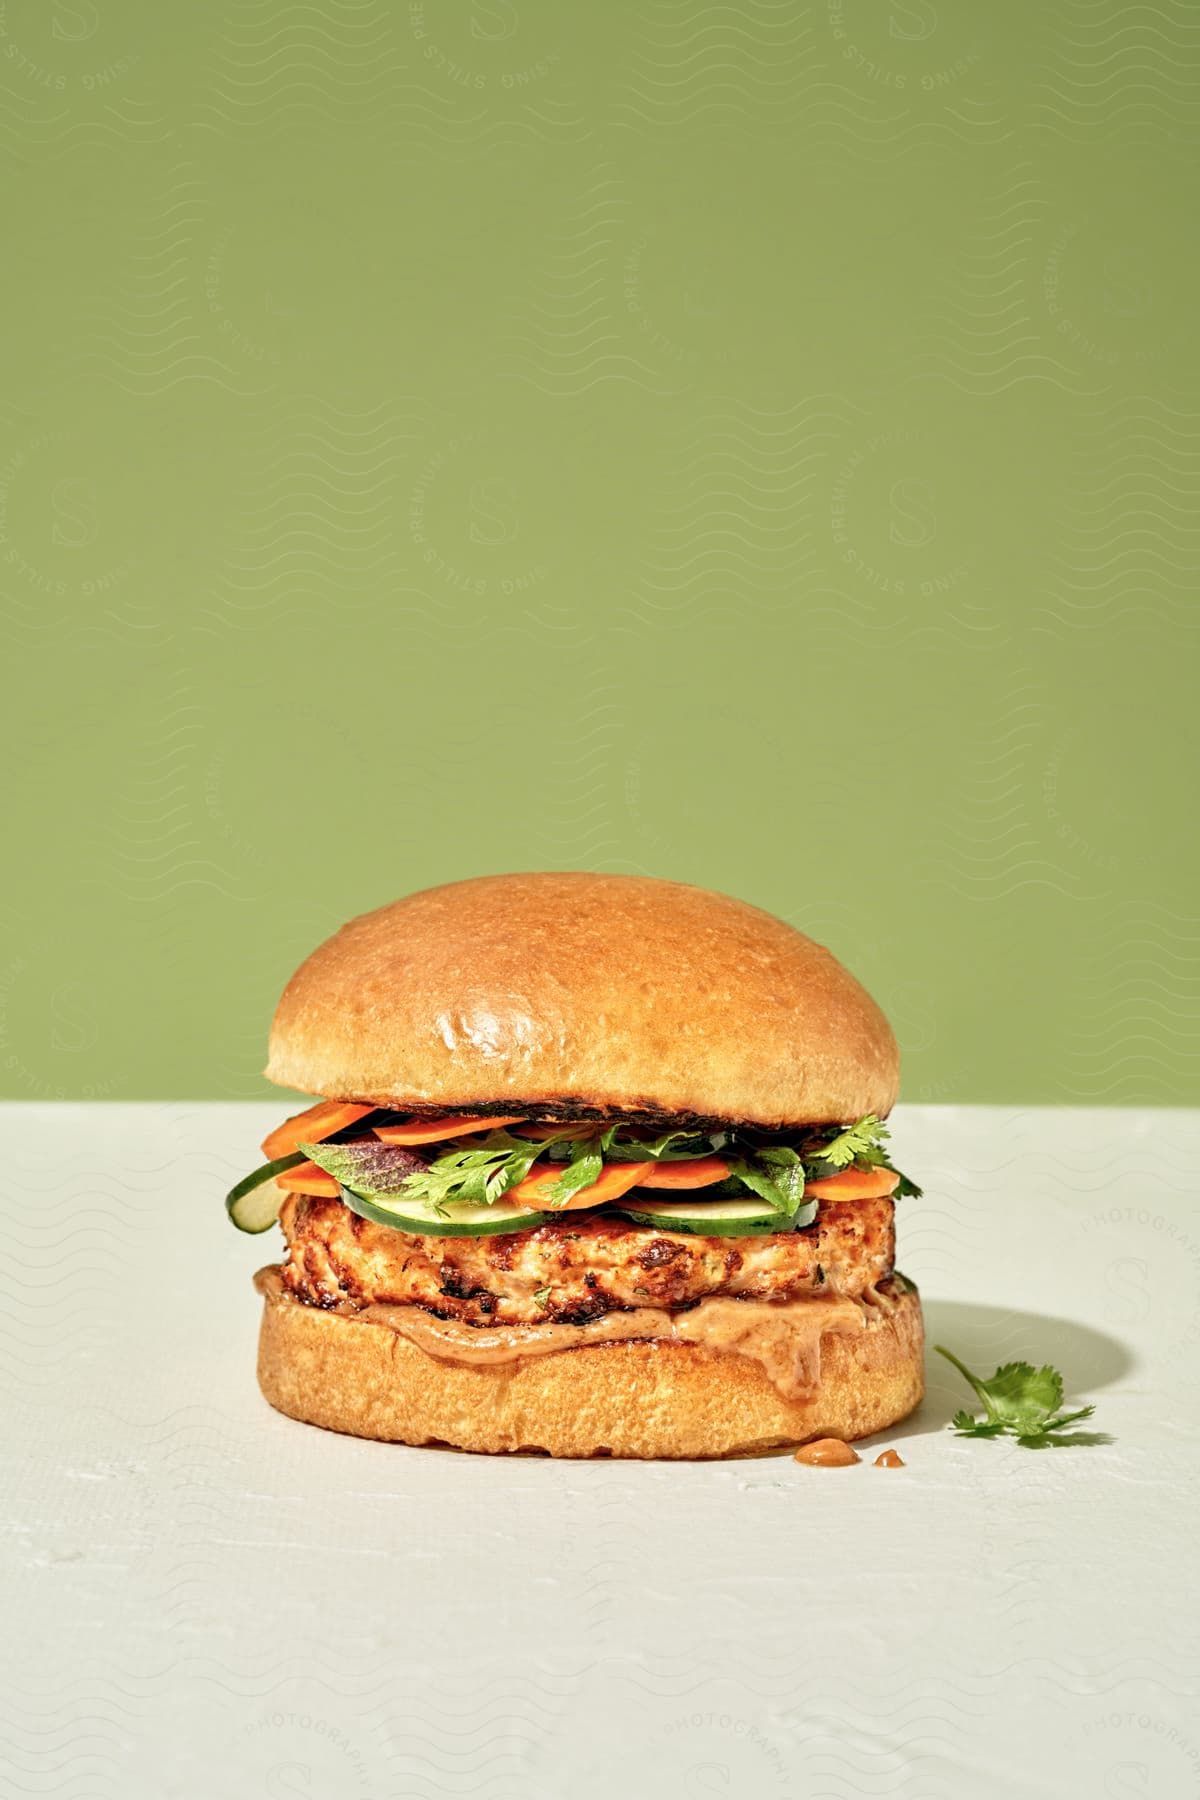 A chicken burger with vegetable toppings and sauce dripping from the bottom bun